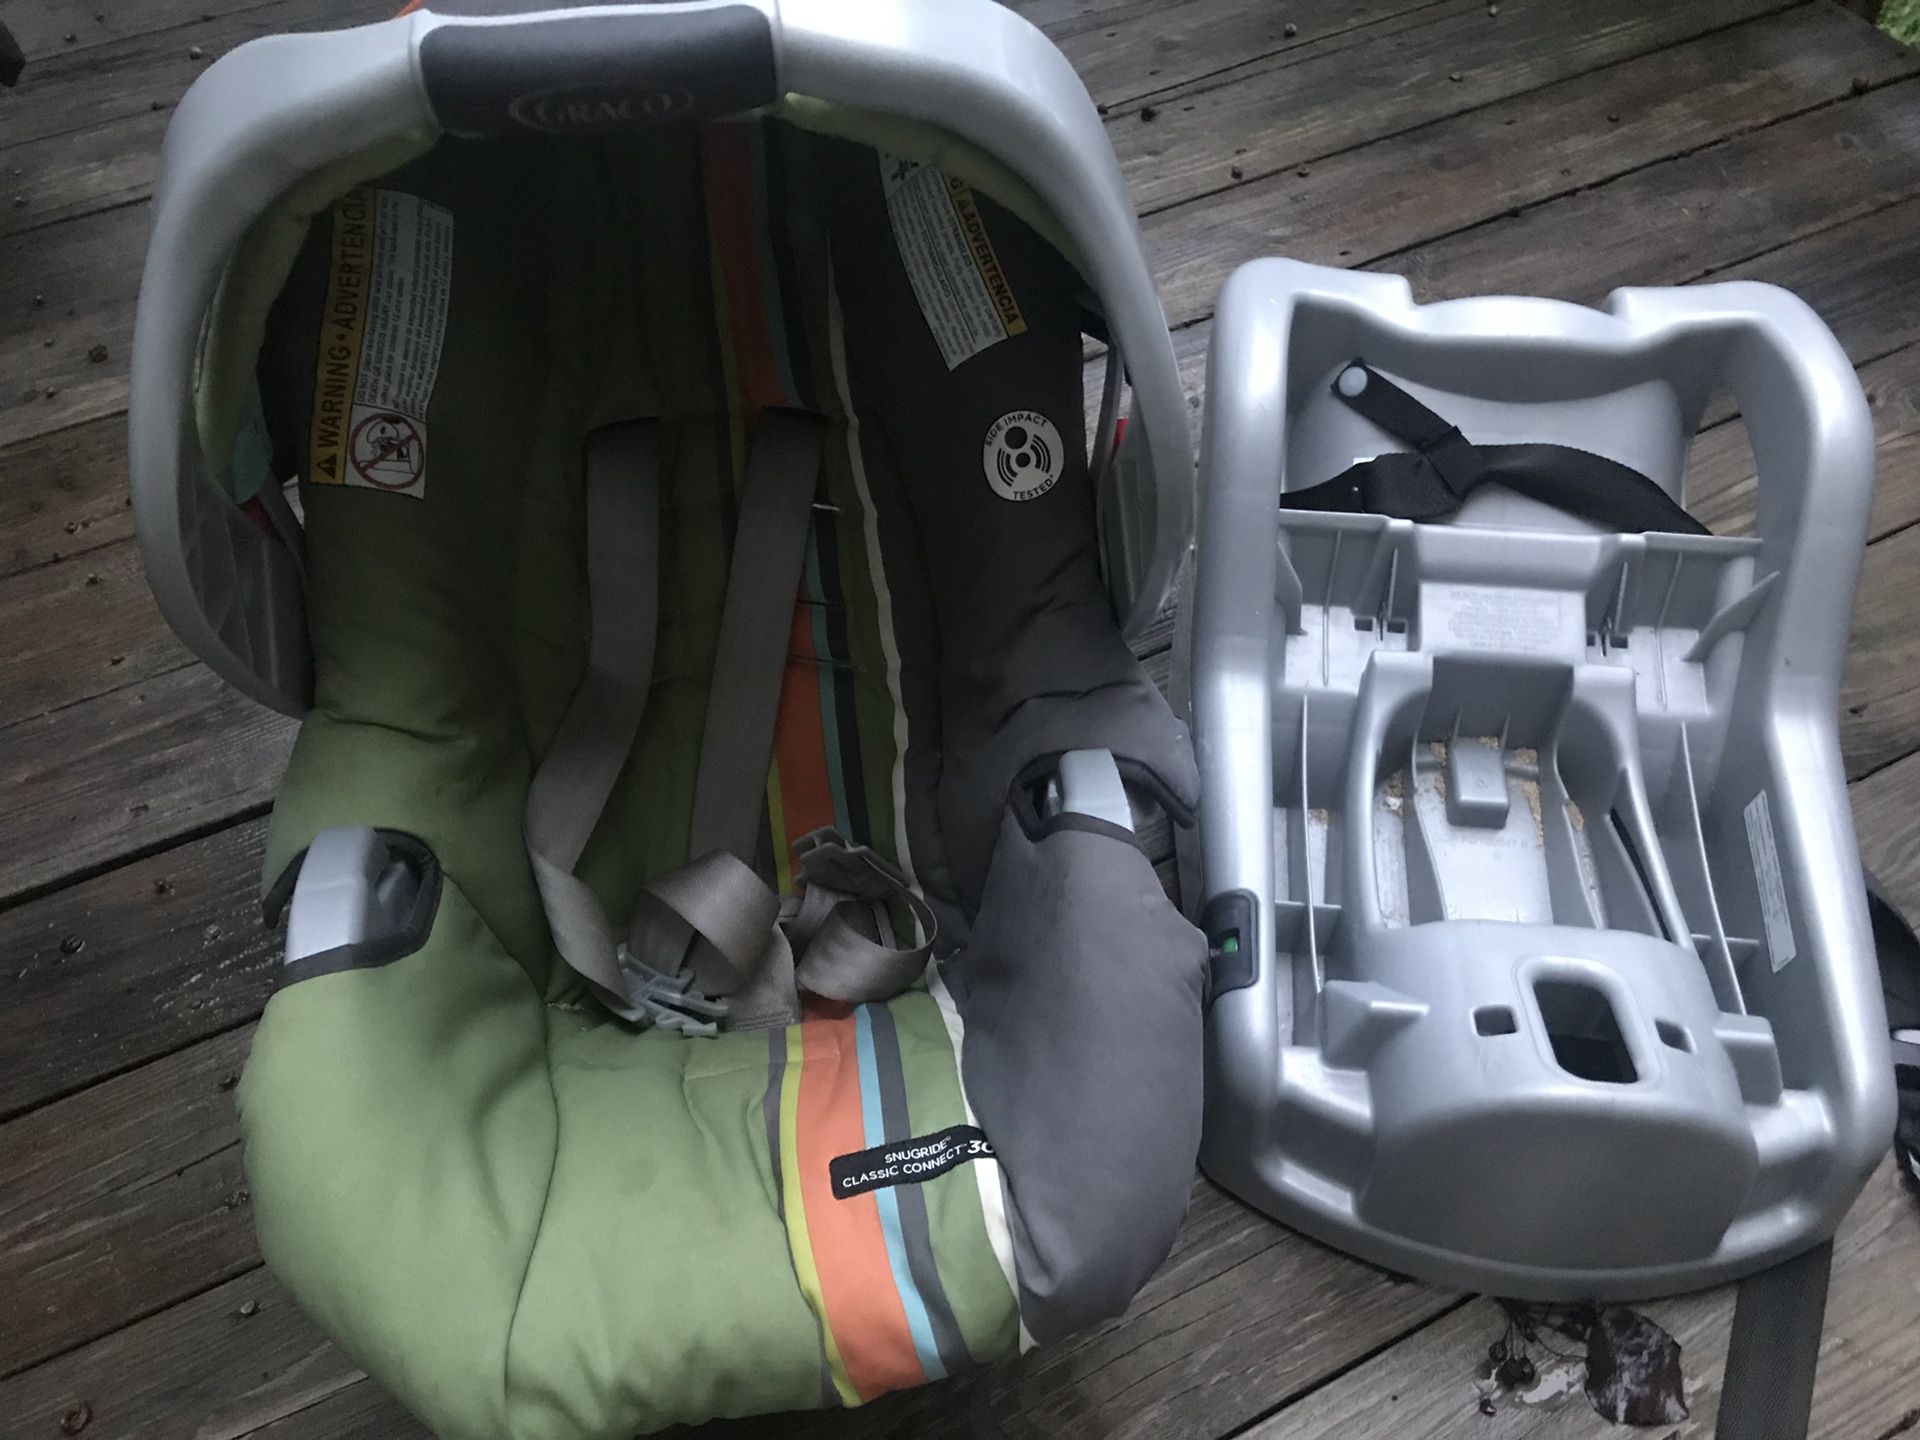 Graco Graco SnugRide 30 Classic Connect Baby Infant Car Seat and base